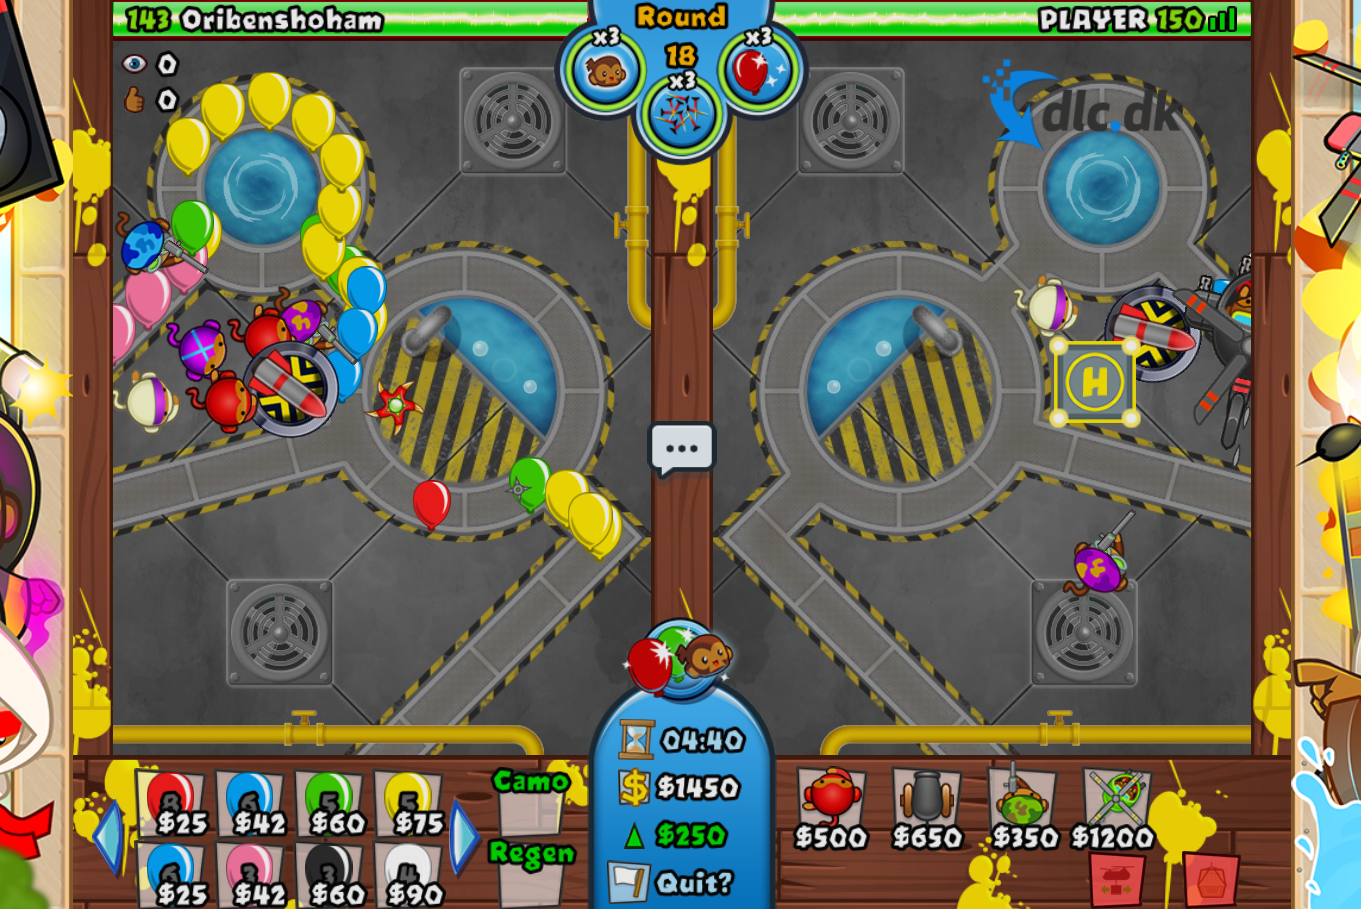 Bloons TD Battle download the new version for ipod